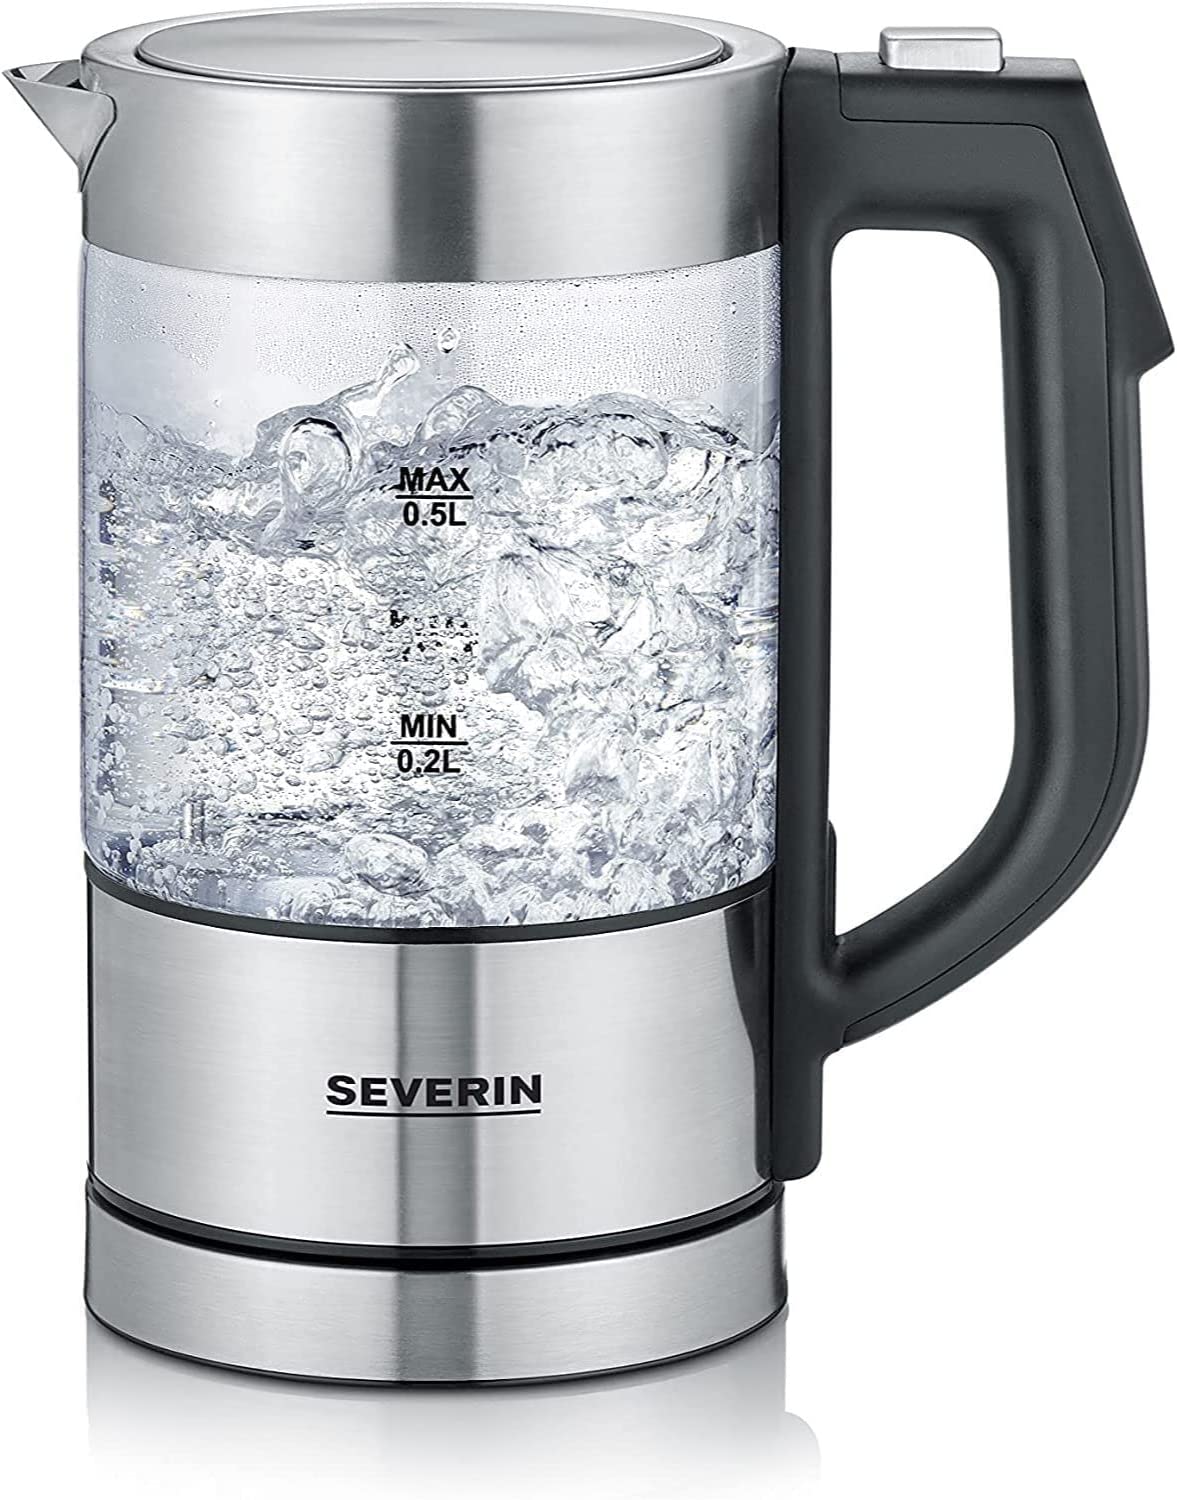 SEVERIN WK 3458 Digital Mini Glass Kettle, Compact Kettle with Temperature Selection, Electric Kettle with Limescale Filter, Glass / Brushed Stainless Steel / Black